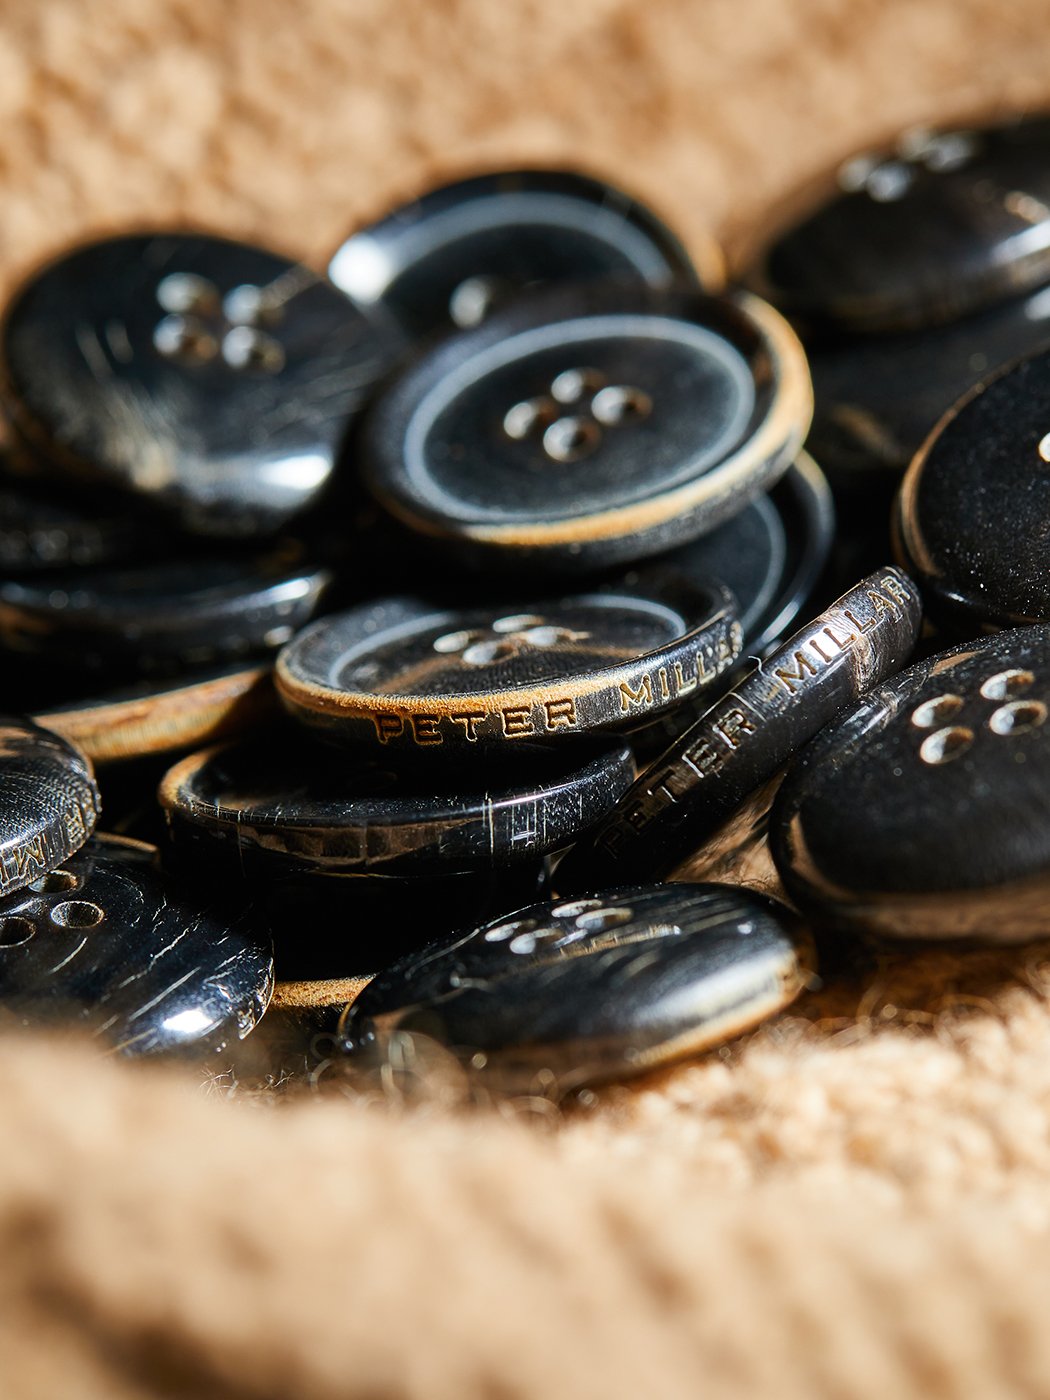 Peter Millar buttons at Albion Knitting co. shot by Jackson Ray Petty 